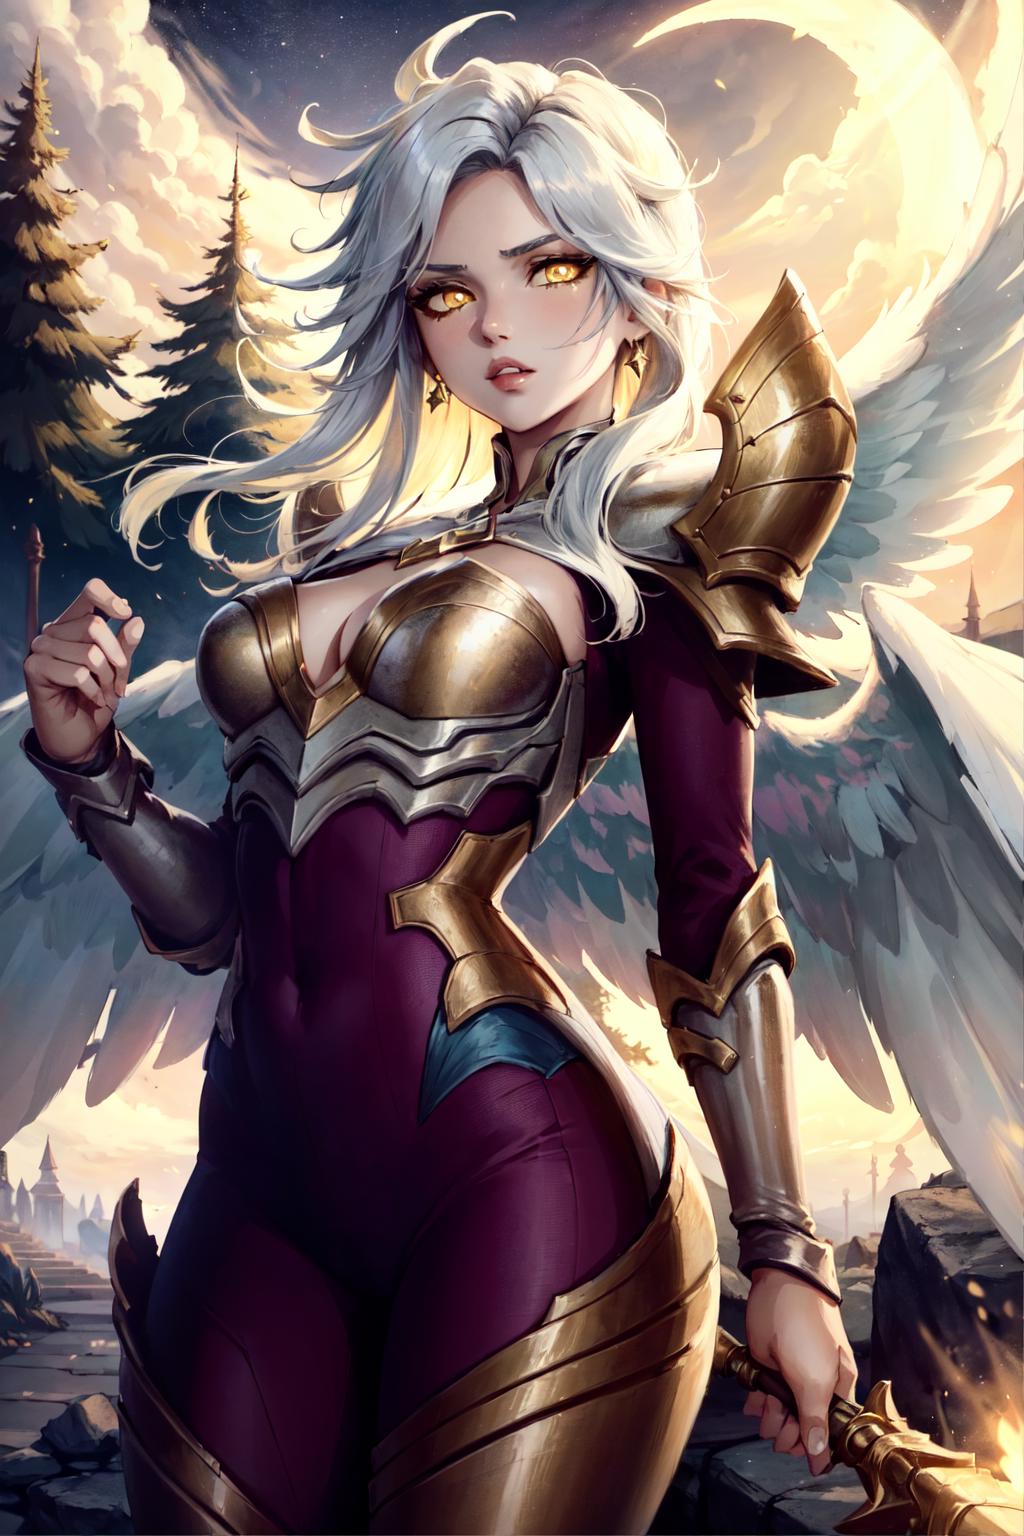 Kayle | League of Legends image by AhriMain